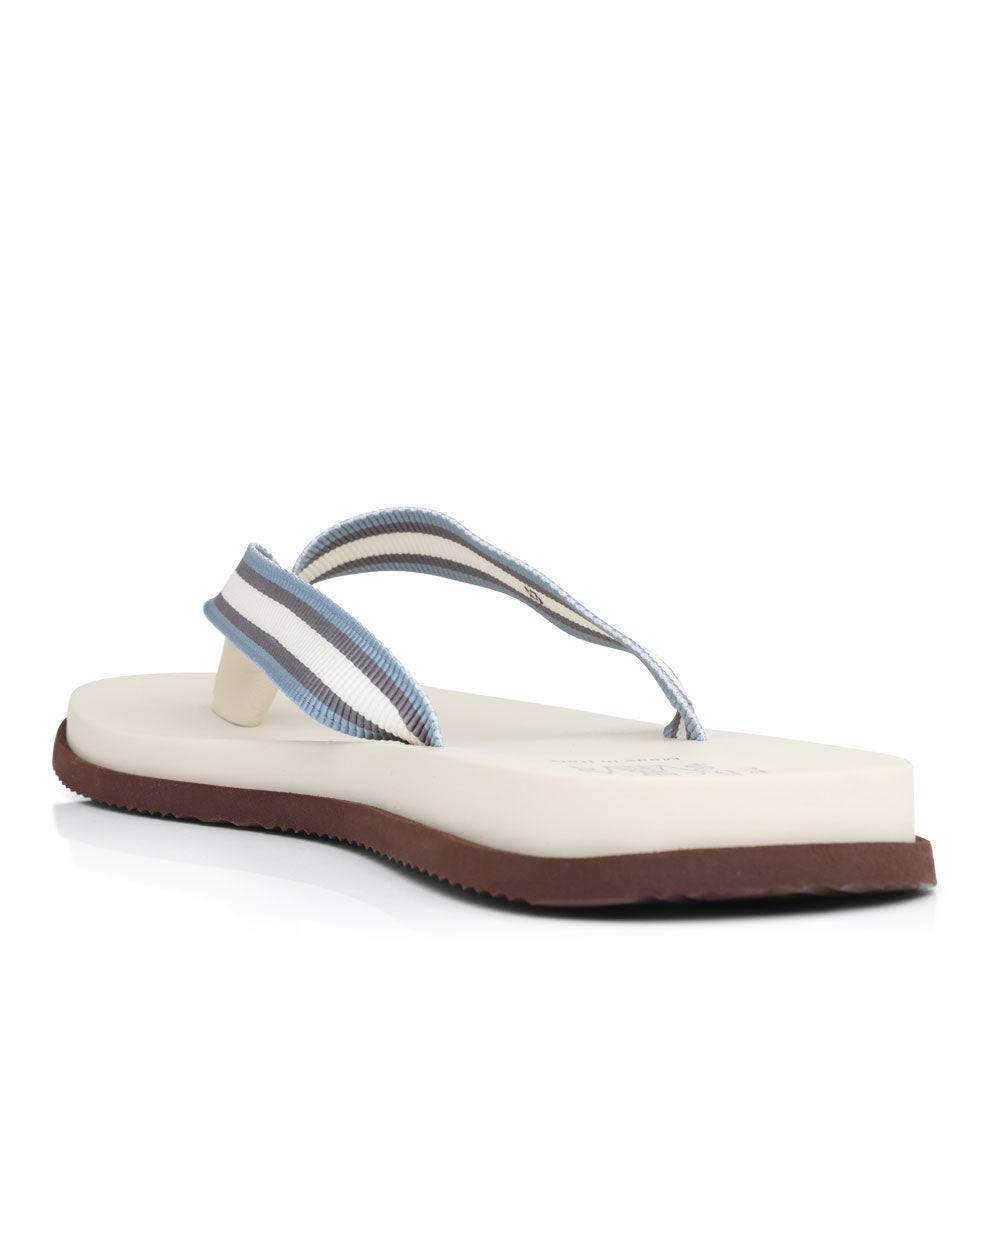 Flip Flop Sandal in White and Blue